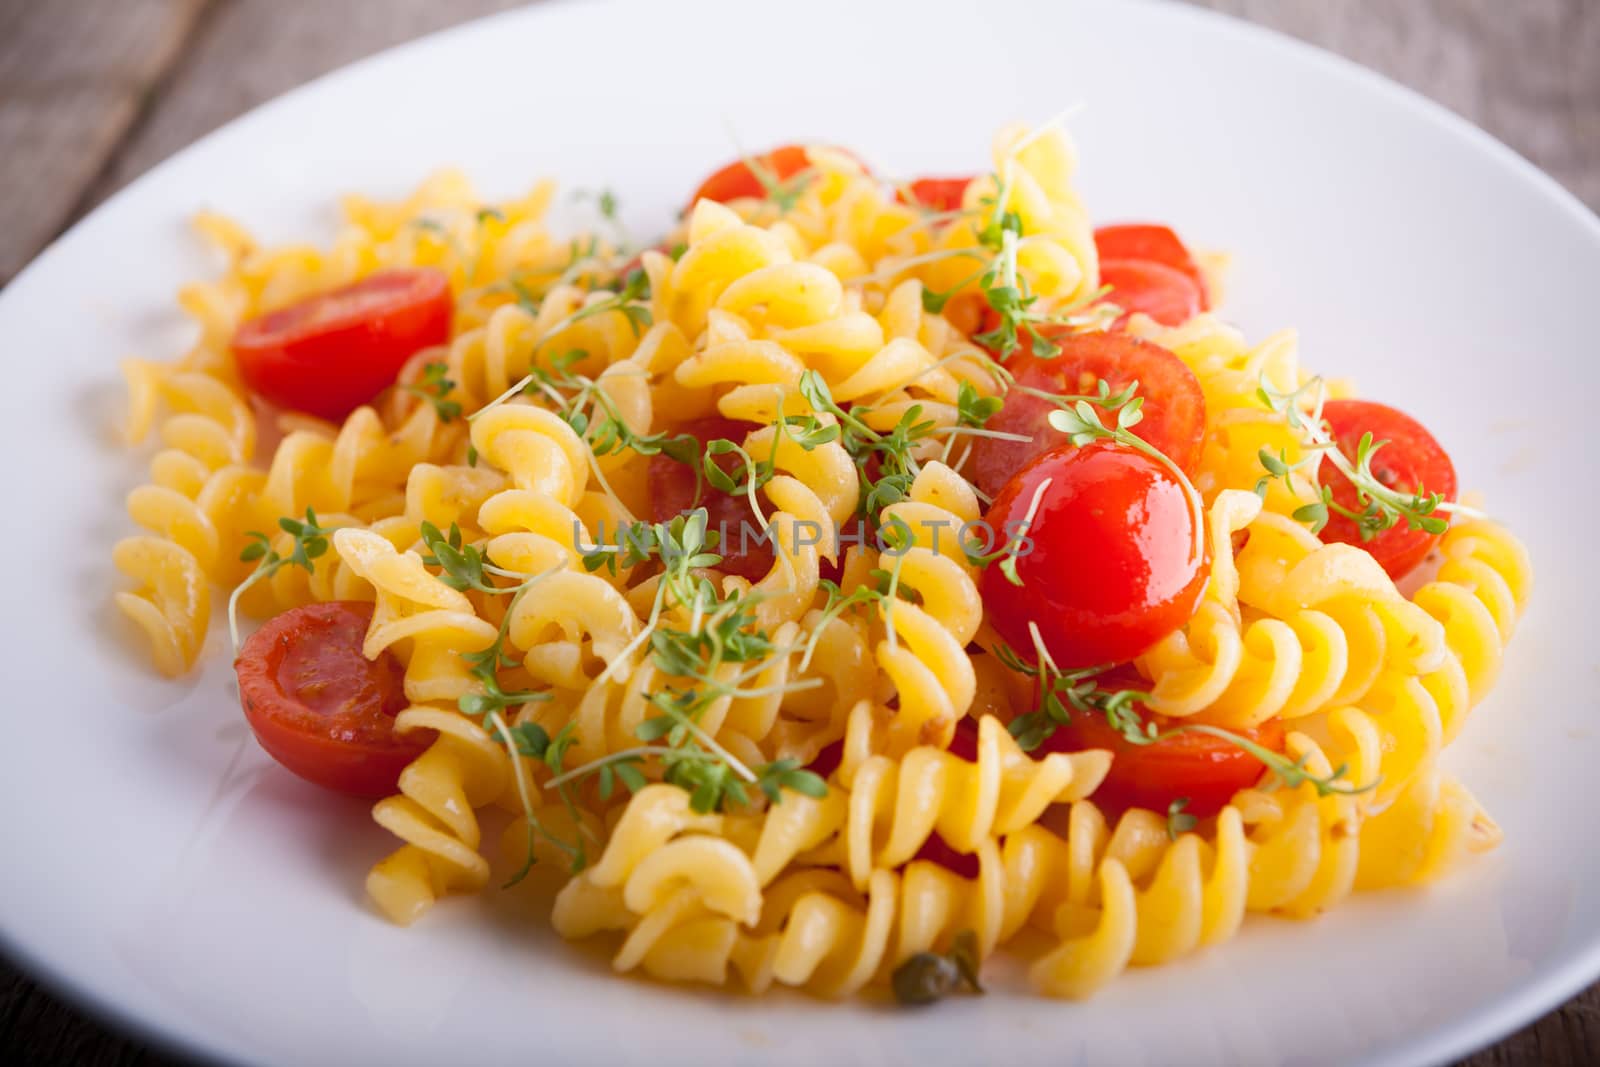 Fussili pasta with watercress and cherry tomatoes